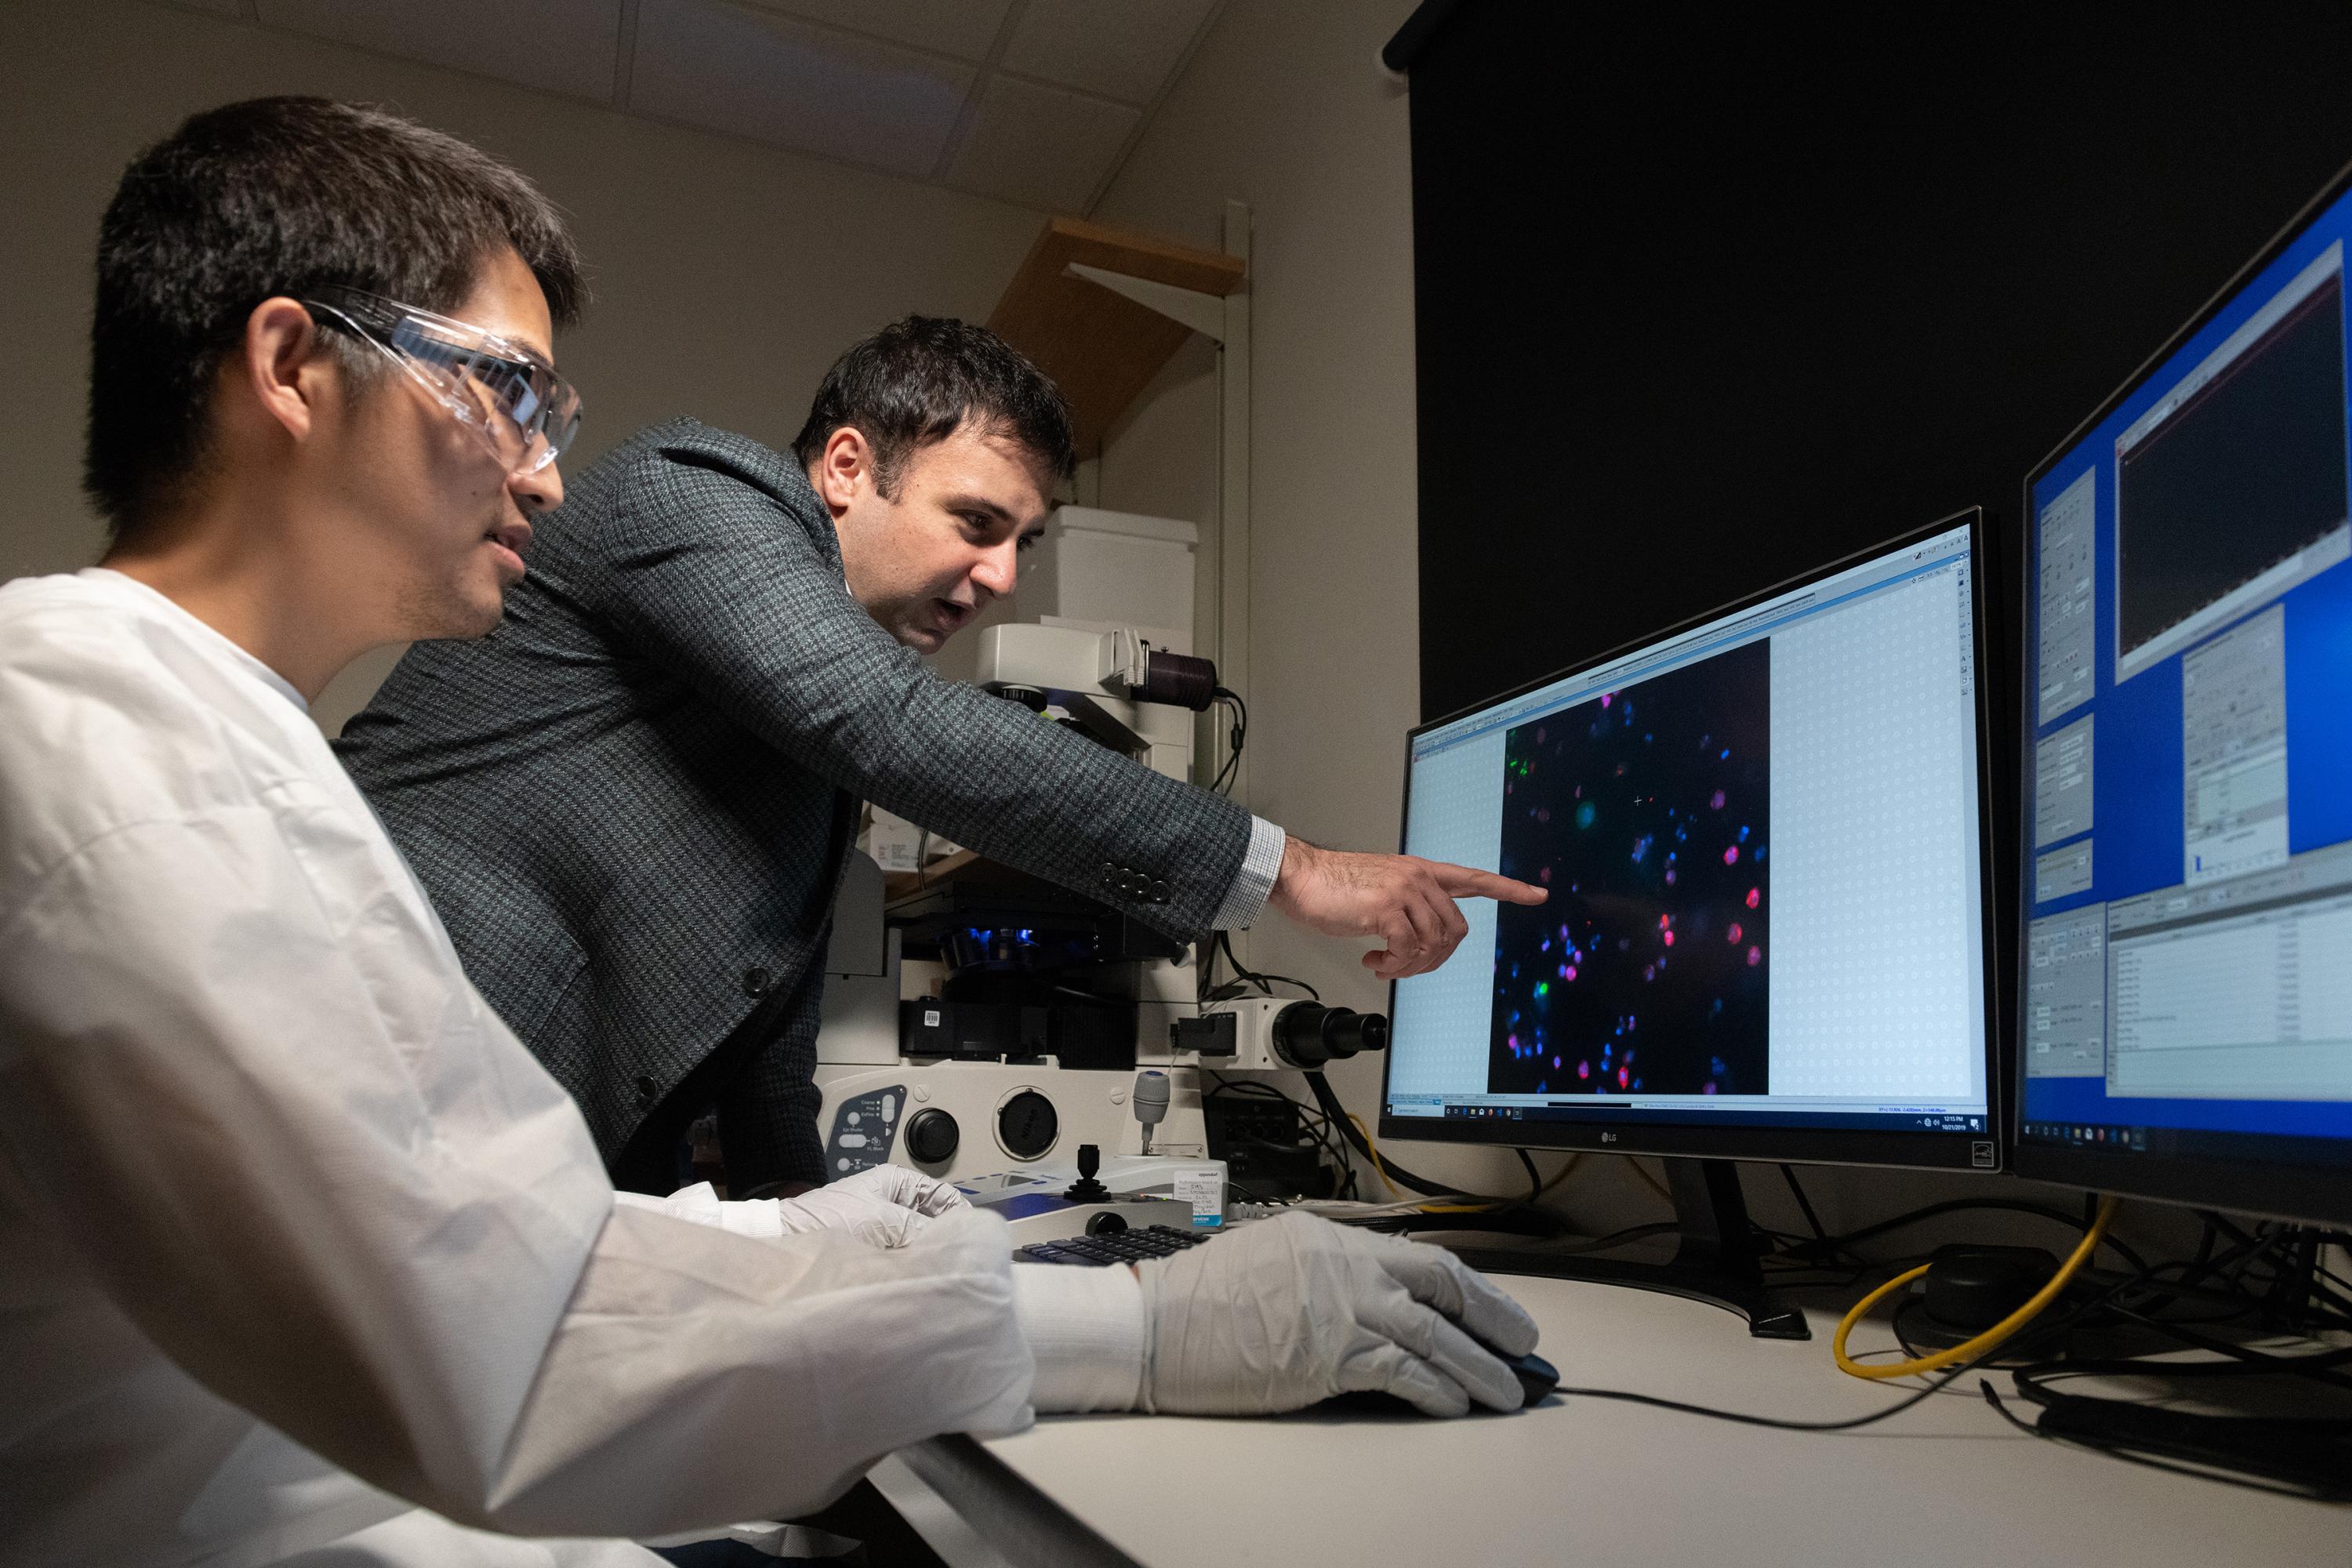 Georgia Tech Graduate Student Chia-Heng Chu and Assistant Professor A. Fatih Sarioglu examine tumor cells captured using their 3D-printed cell trap. The trap captures white blood cells to isolate tumor cells from a blood sample. (Photo: Allison Carter, Georgia Tech)